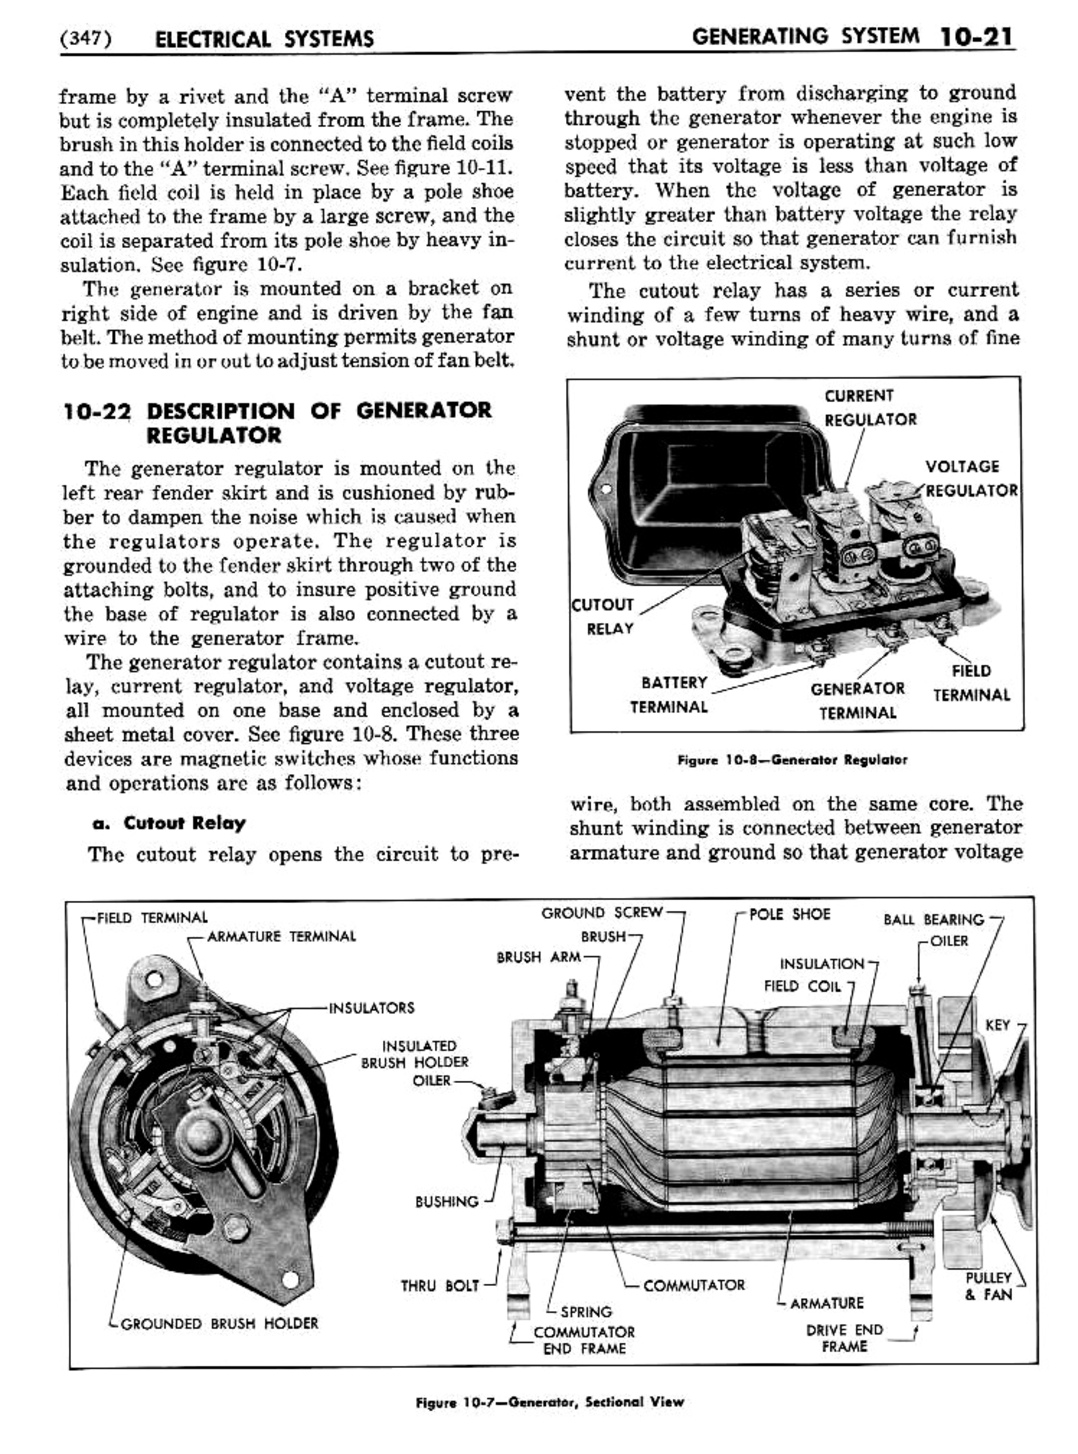 n_11 1956 Buick Shop Manual - Electrical Systems-021-021.jpg